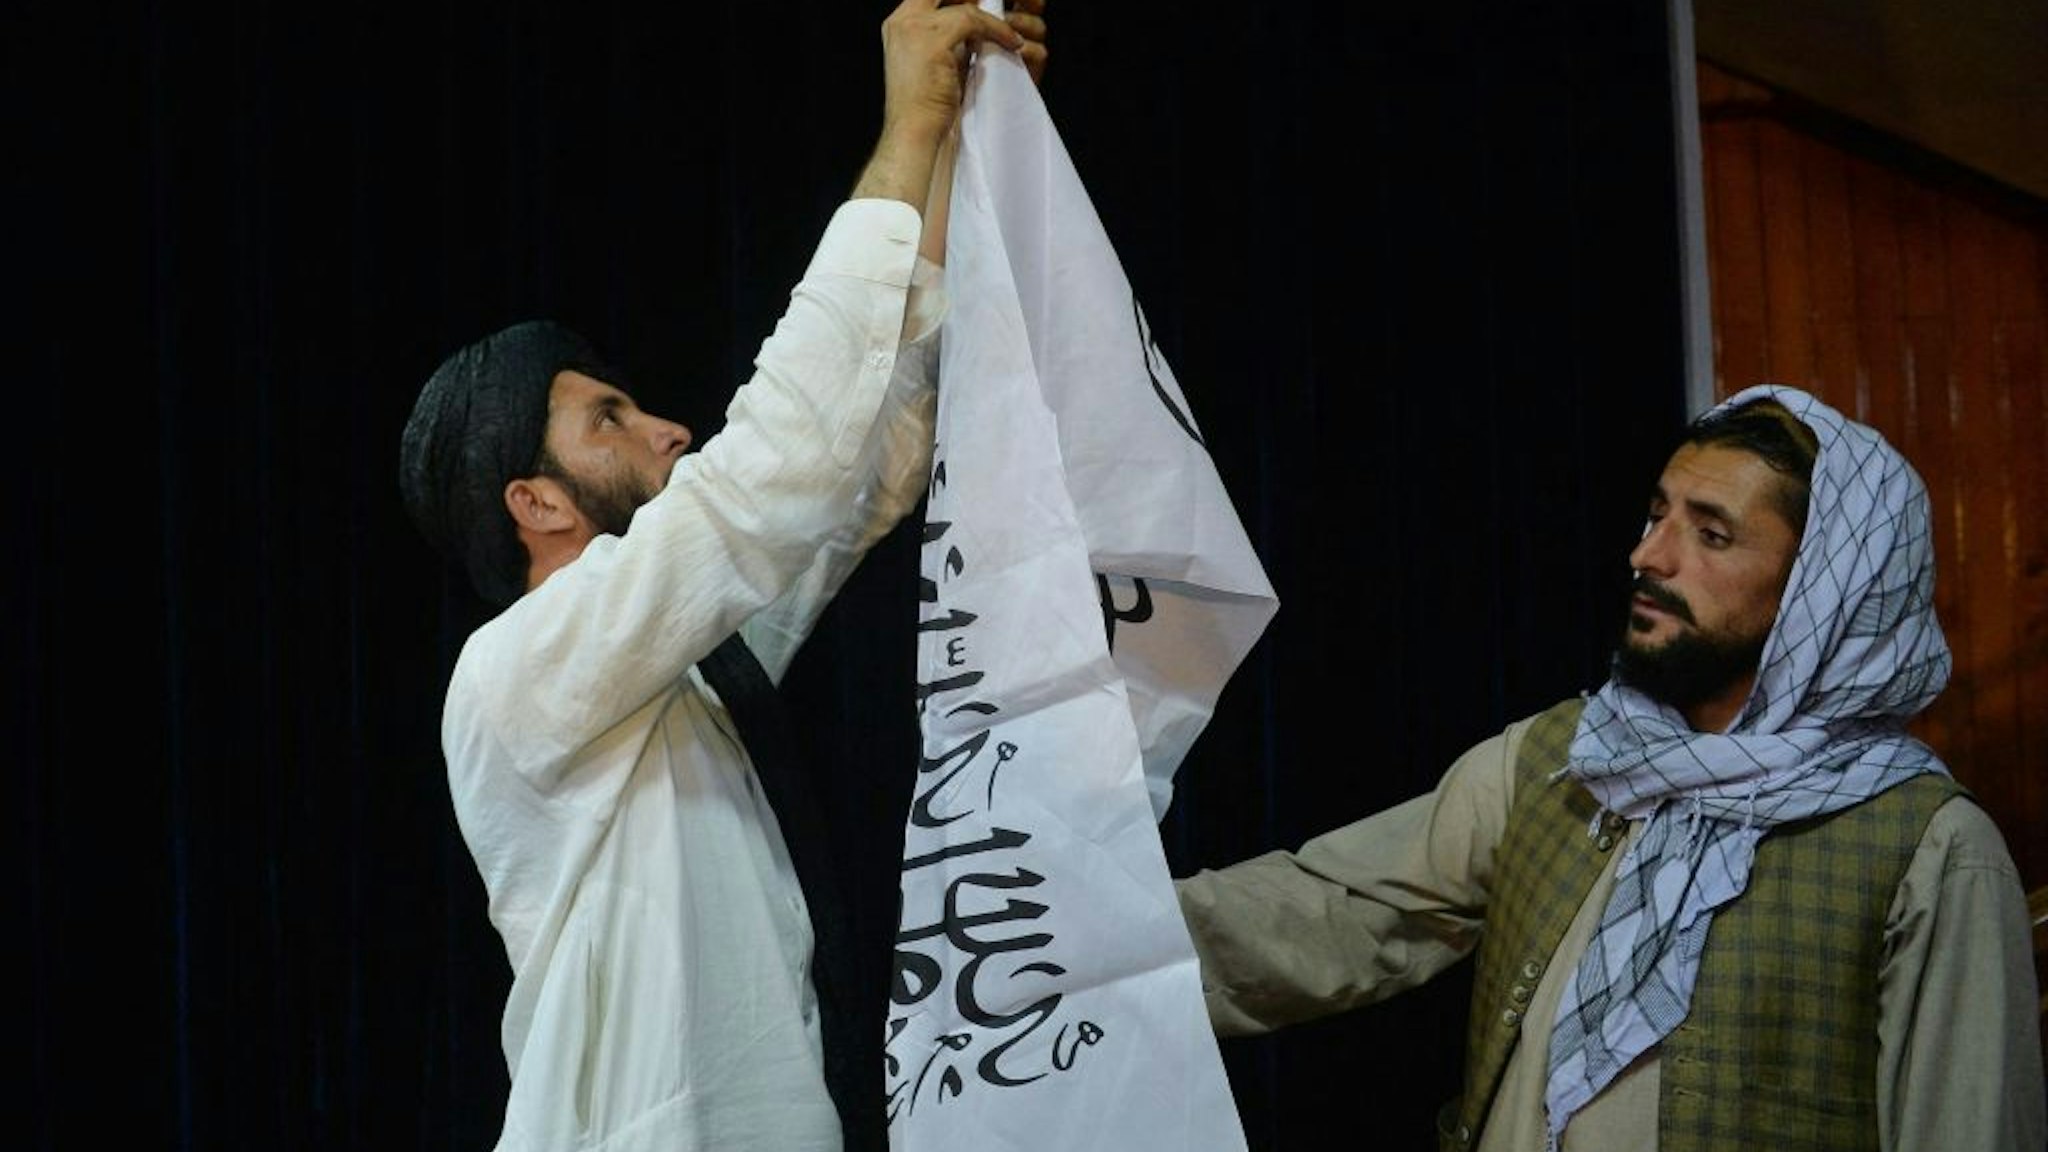 Men adjust the Taliban flag before the arrival of Taliban spokesperson Zabihullah Mujahid (unseen) to address the first press conference in Kabul on August 17, 2021 following the Taliban stunning takeover of Afghanistan. (Photo by Hoshang Hashimi / AFP) (Photo by HOSHANG HASHIMI/AFP via Getty Images)